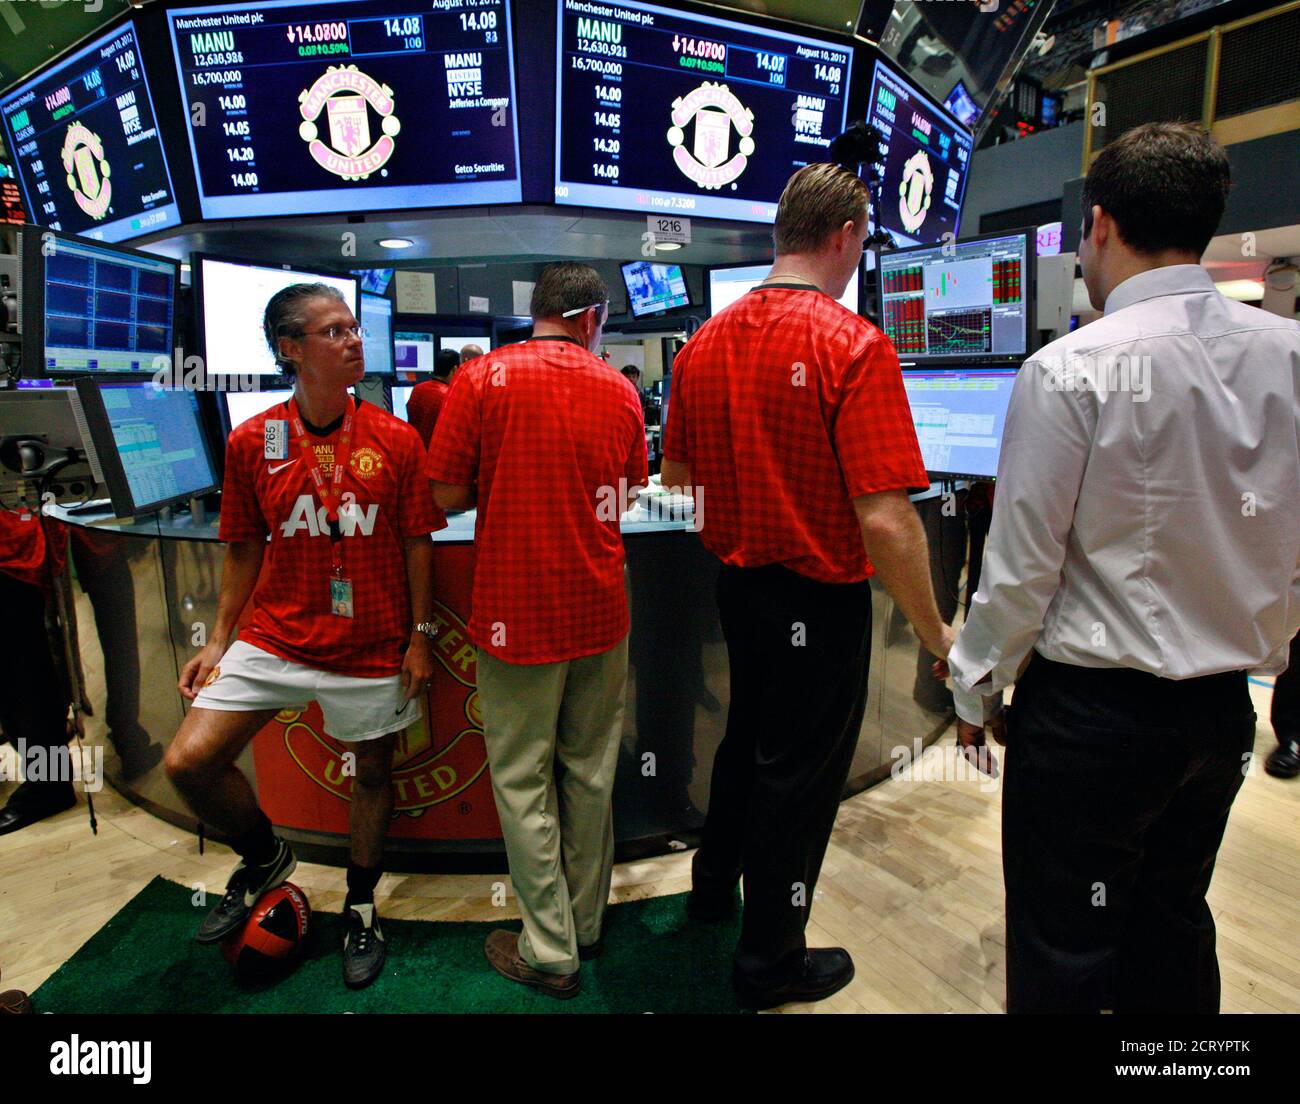 Traders from Getco Securities work at the post that trades Manchester United Ltd following its initial public offering on the floor of the New York Stock Exchange, August 10, 2012. Shares in Manchester United priced below expectations and were essentially flat in early trading on Friday, a disappointing stock market debut for the world's most famous soccer club and most valuable sporting team. REUTERS/Brendan McDermid (UNITED STATES - Tags: BUSINESS SPORT SOCCER) Stock Photo